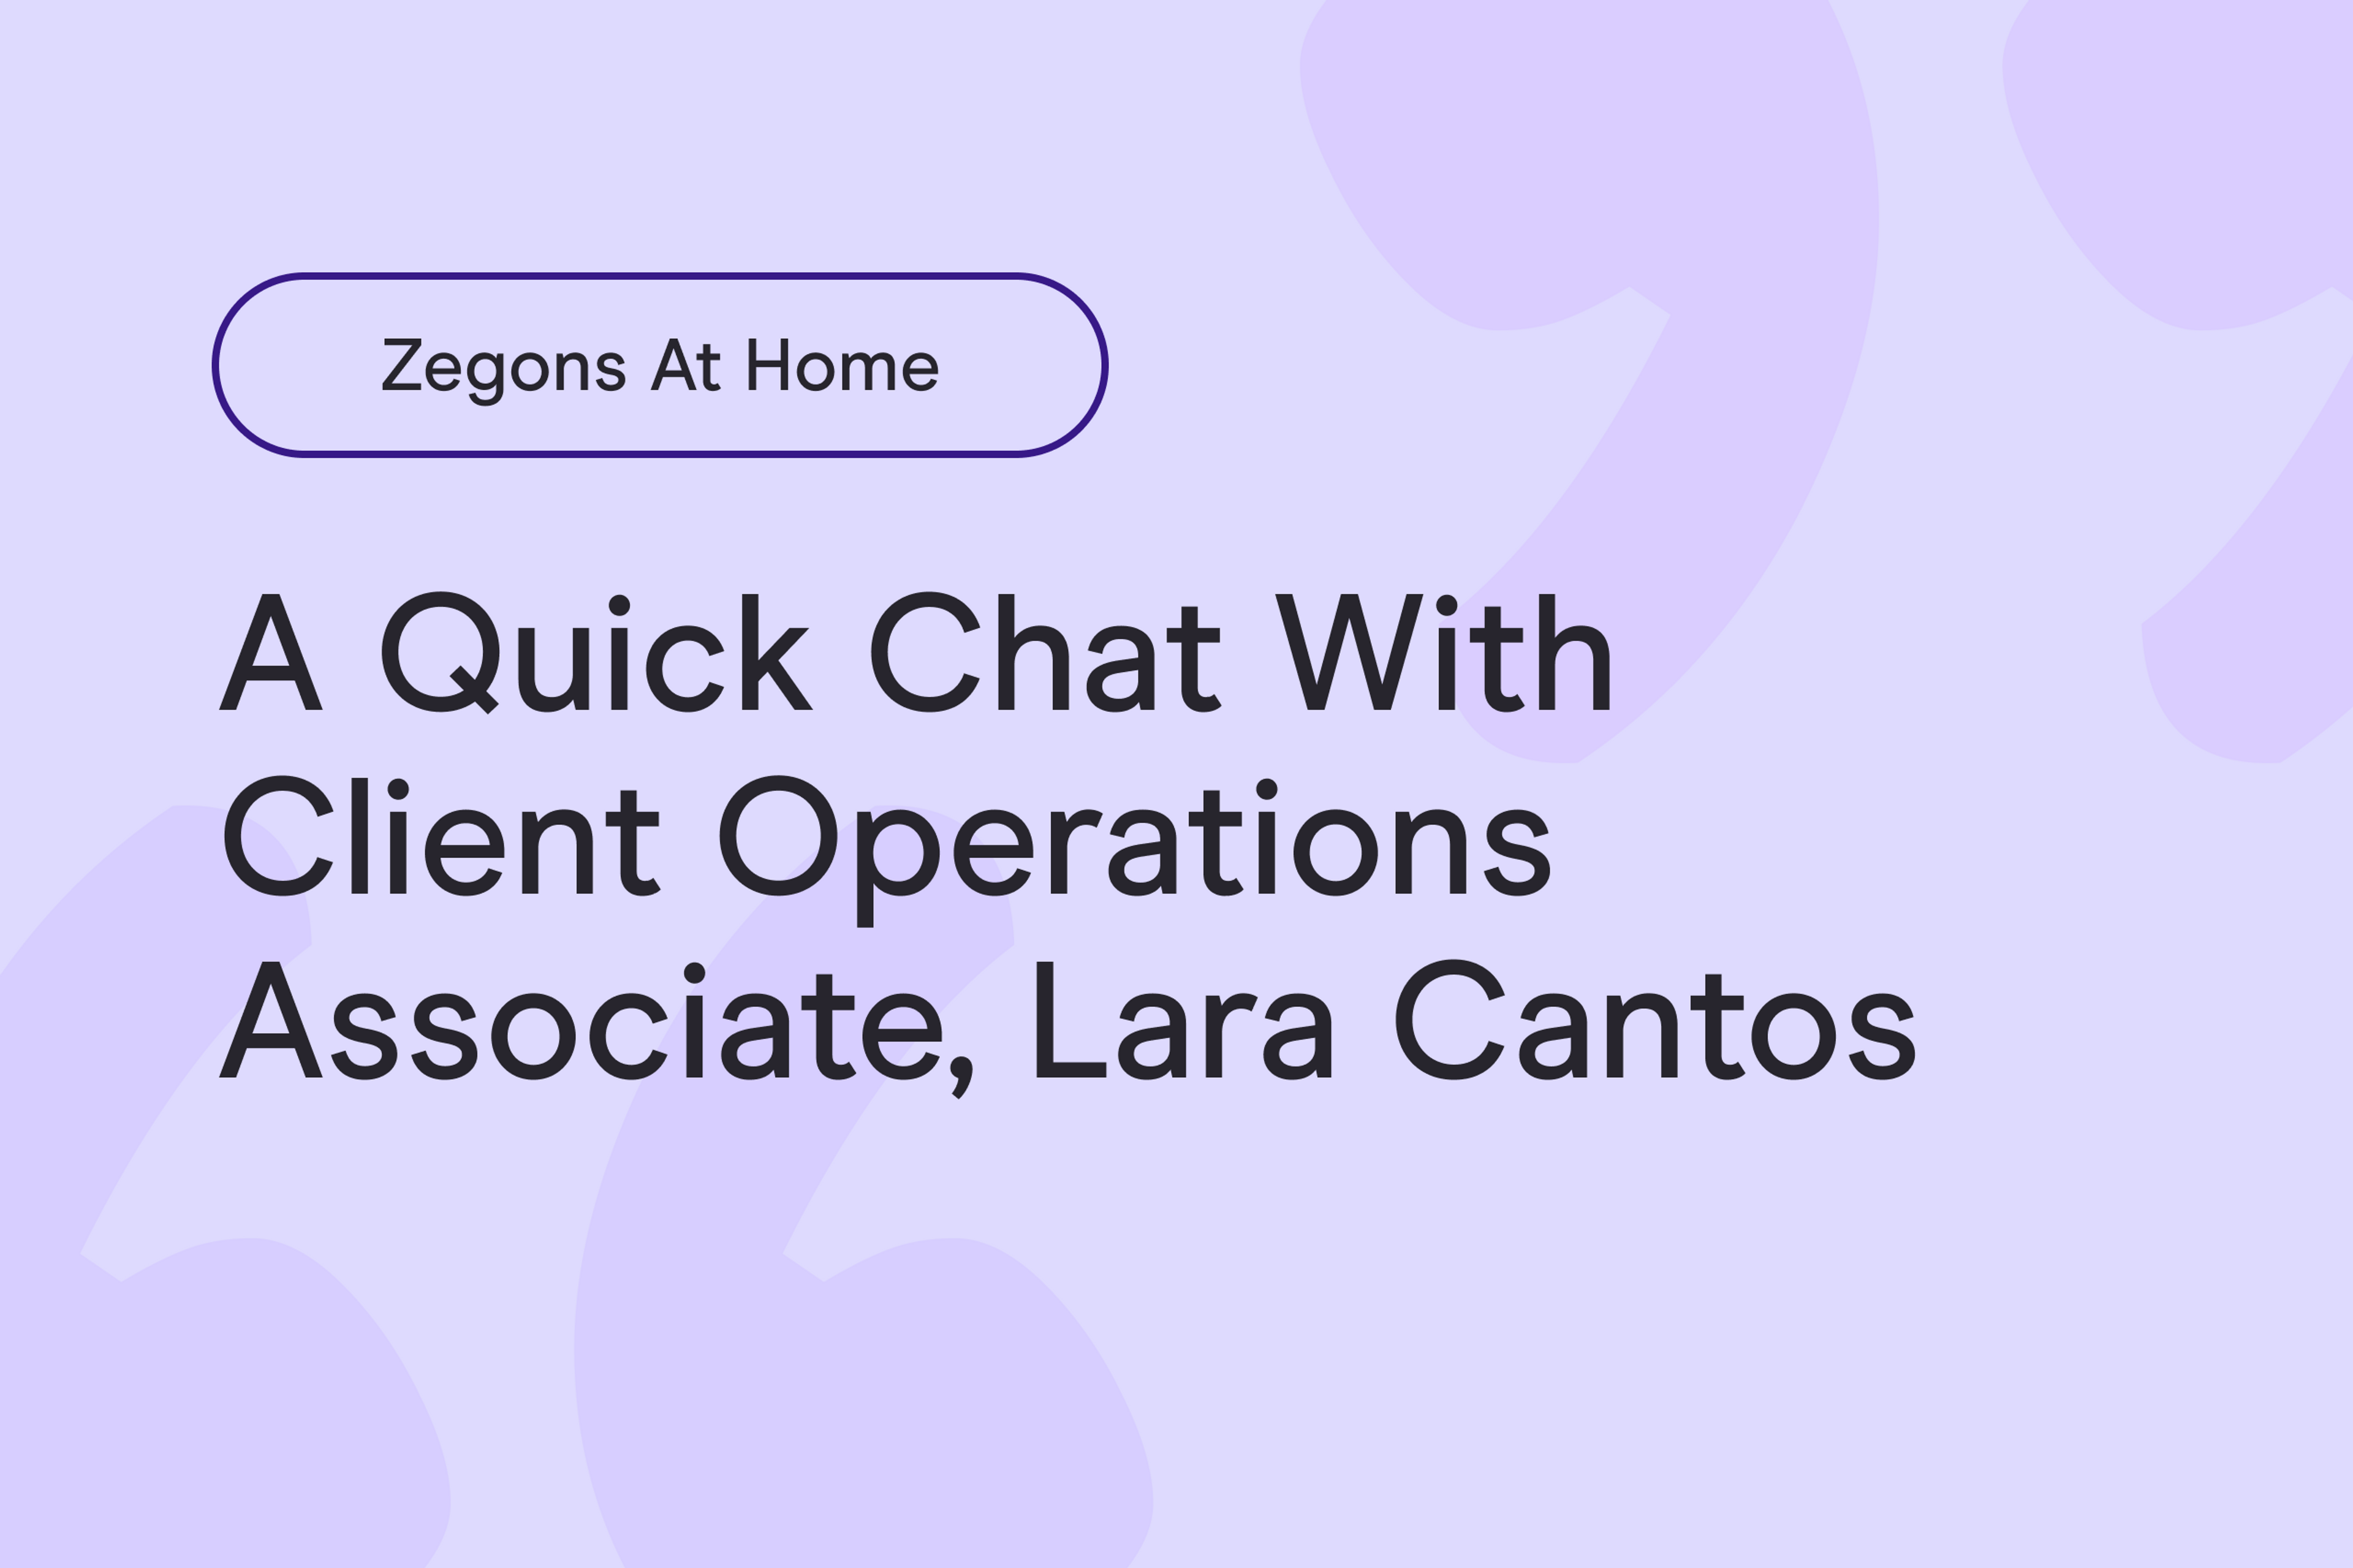 Zegons From Home: Lara Cantos